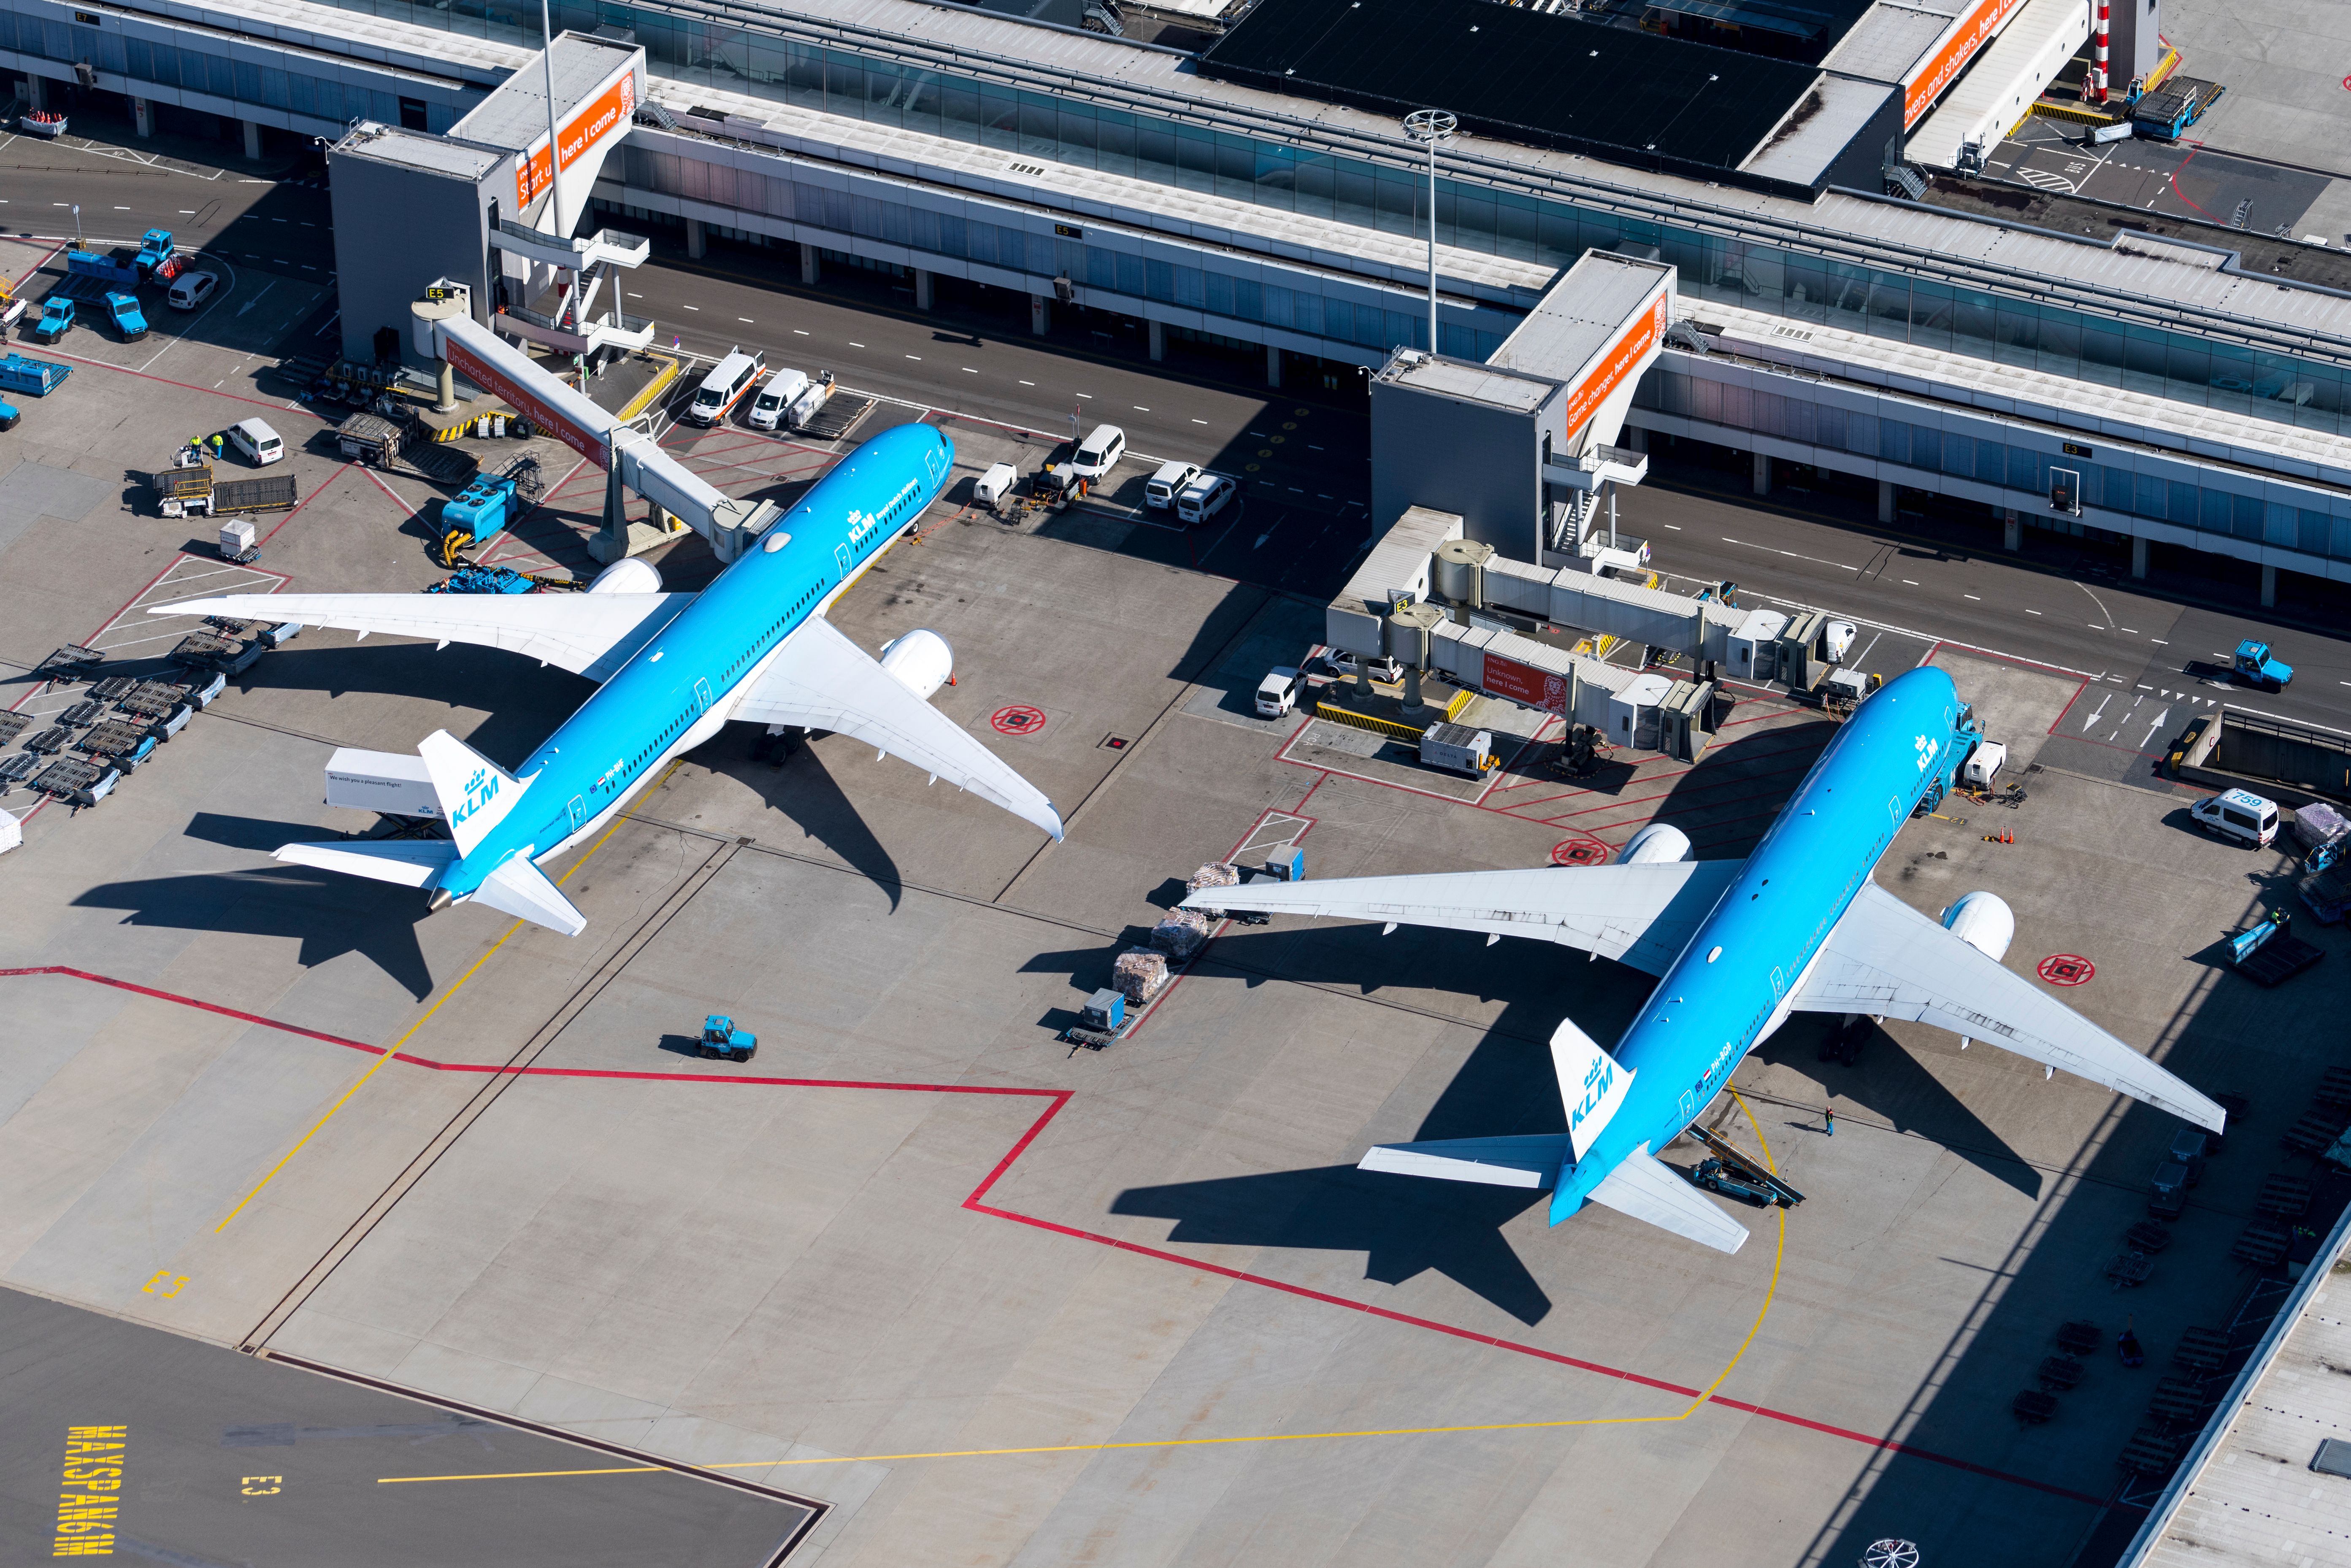 KLM Boeing 777 and 787 Aerial View at Amsterdam Schiphol